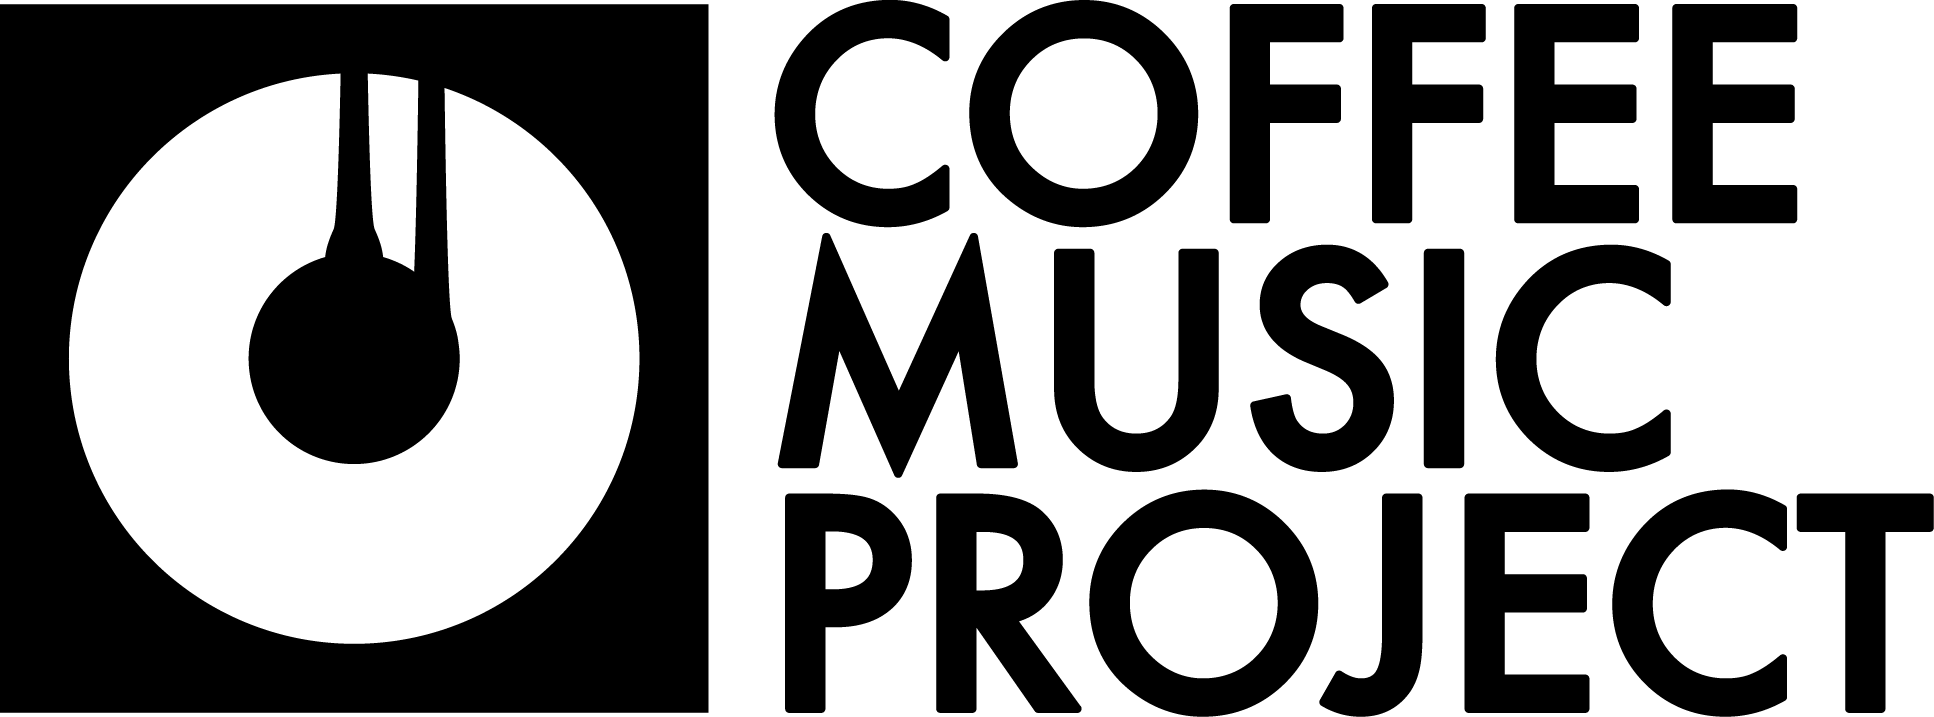 The Coffee Music Project